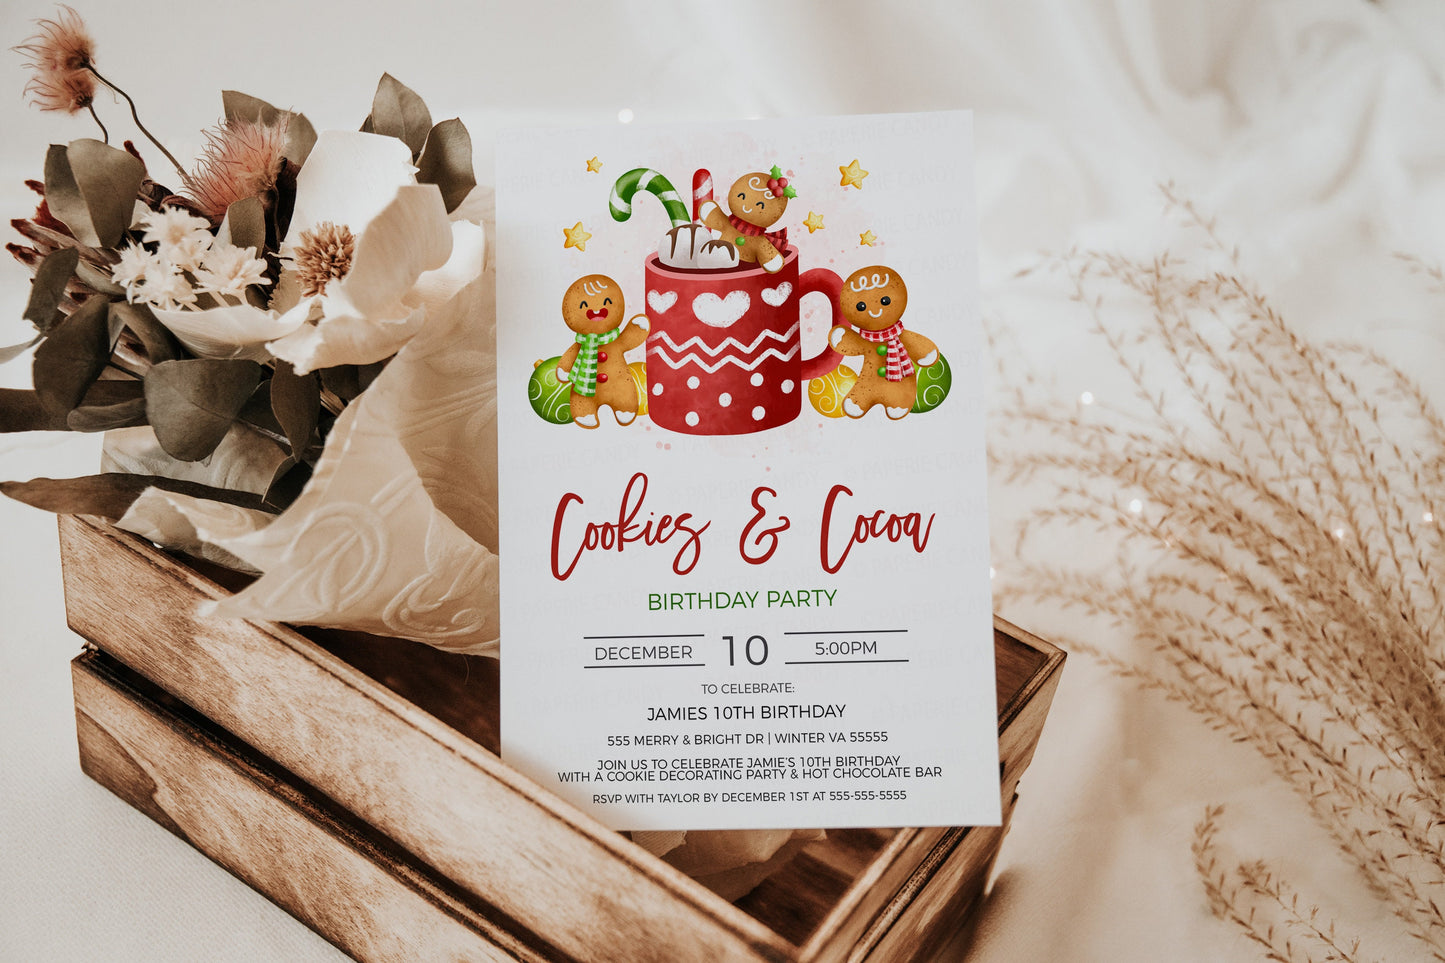 Christmas Cookies & Cocoa Birthday Party Invitation, Editable Birthday Cookie Decorating And Hot Chocolate Bar Party, DIY Printable Template